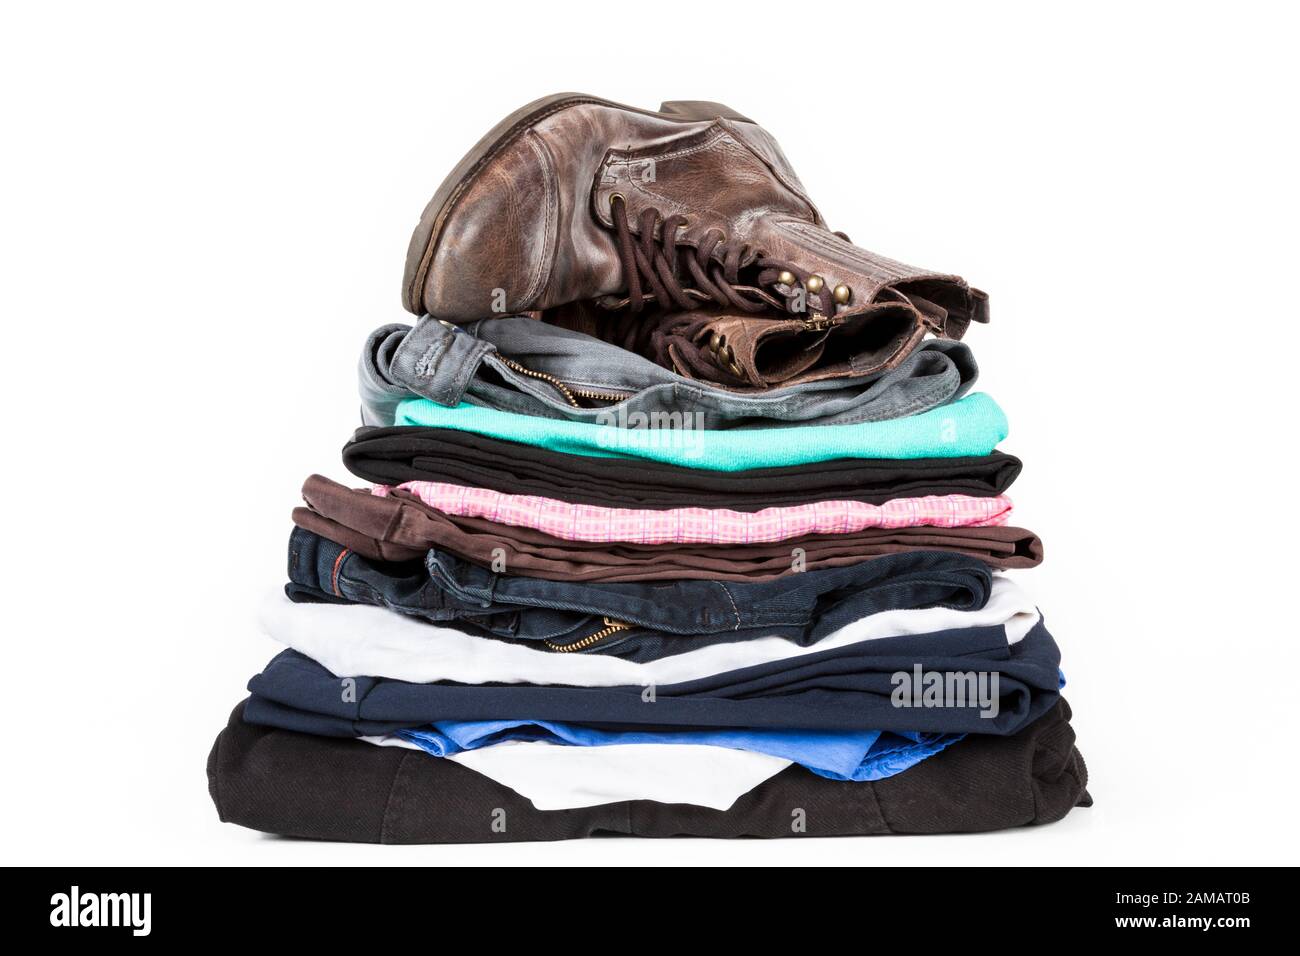 Pile of second hand clothing. A stack of old clothes folded neatly with a pair of worn boots on top Stock Photo